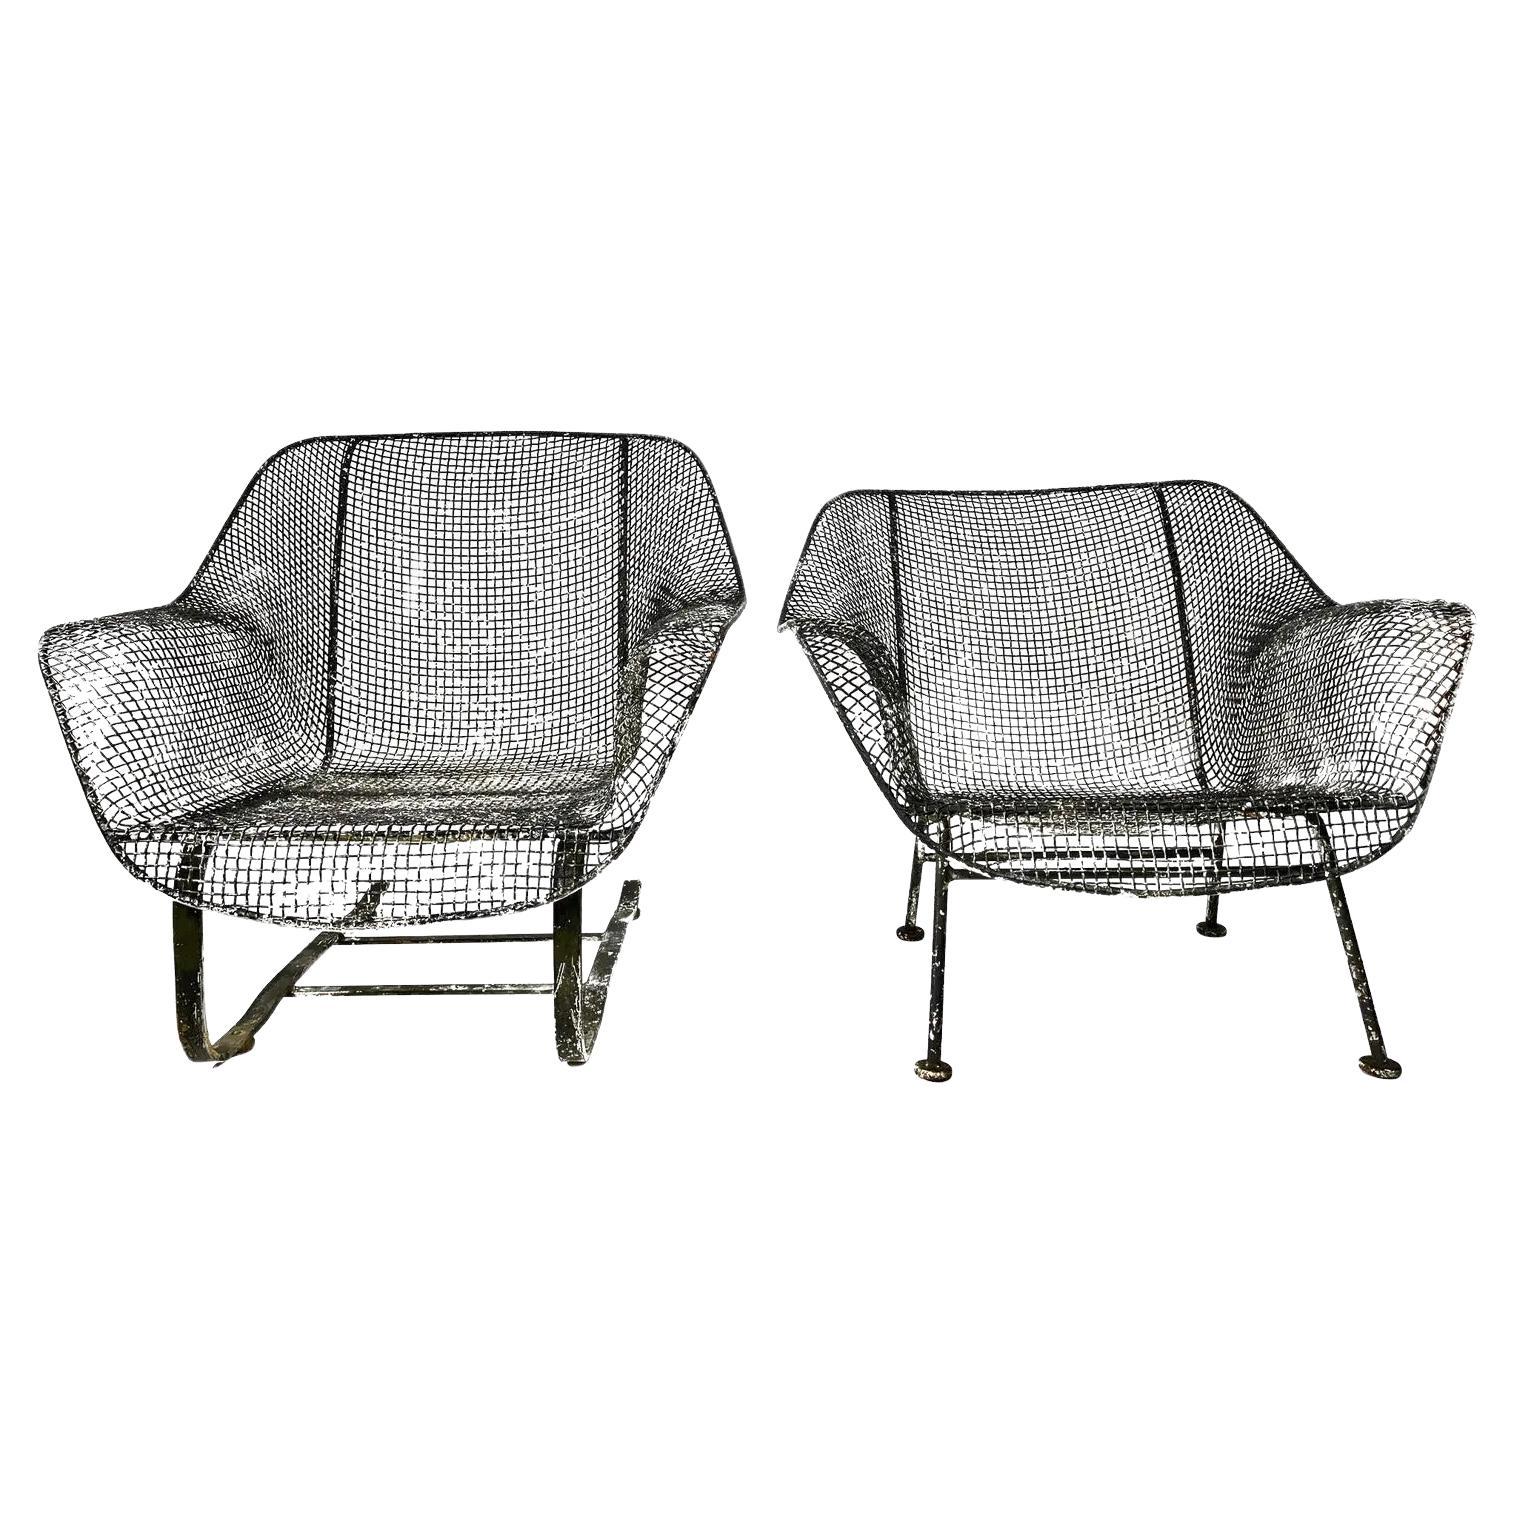 Russell Woodard Sculptura Wrought Iron Lounge Chairs, a Pair For Sale